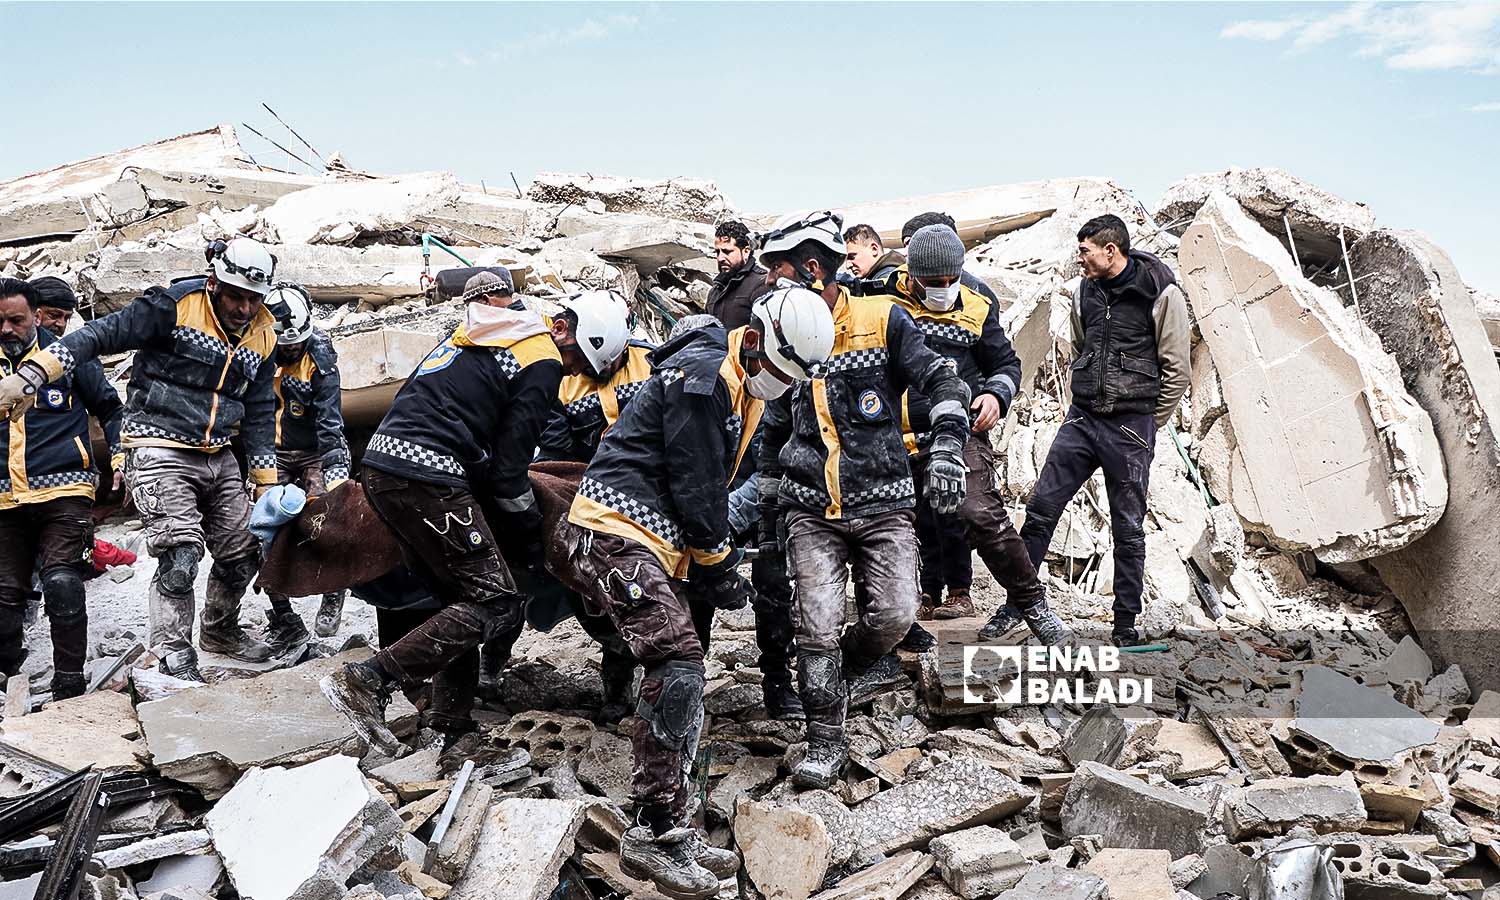 Volunteers from the Syria Civil Defense (SCD) teams carry one of the injured who was stuck under the rubble in Azmarin village following the earthquake that struck the northwestern Syrian region - February 7, 2023 (Enab Baladi/Mohammad Nasan Dabel)
